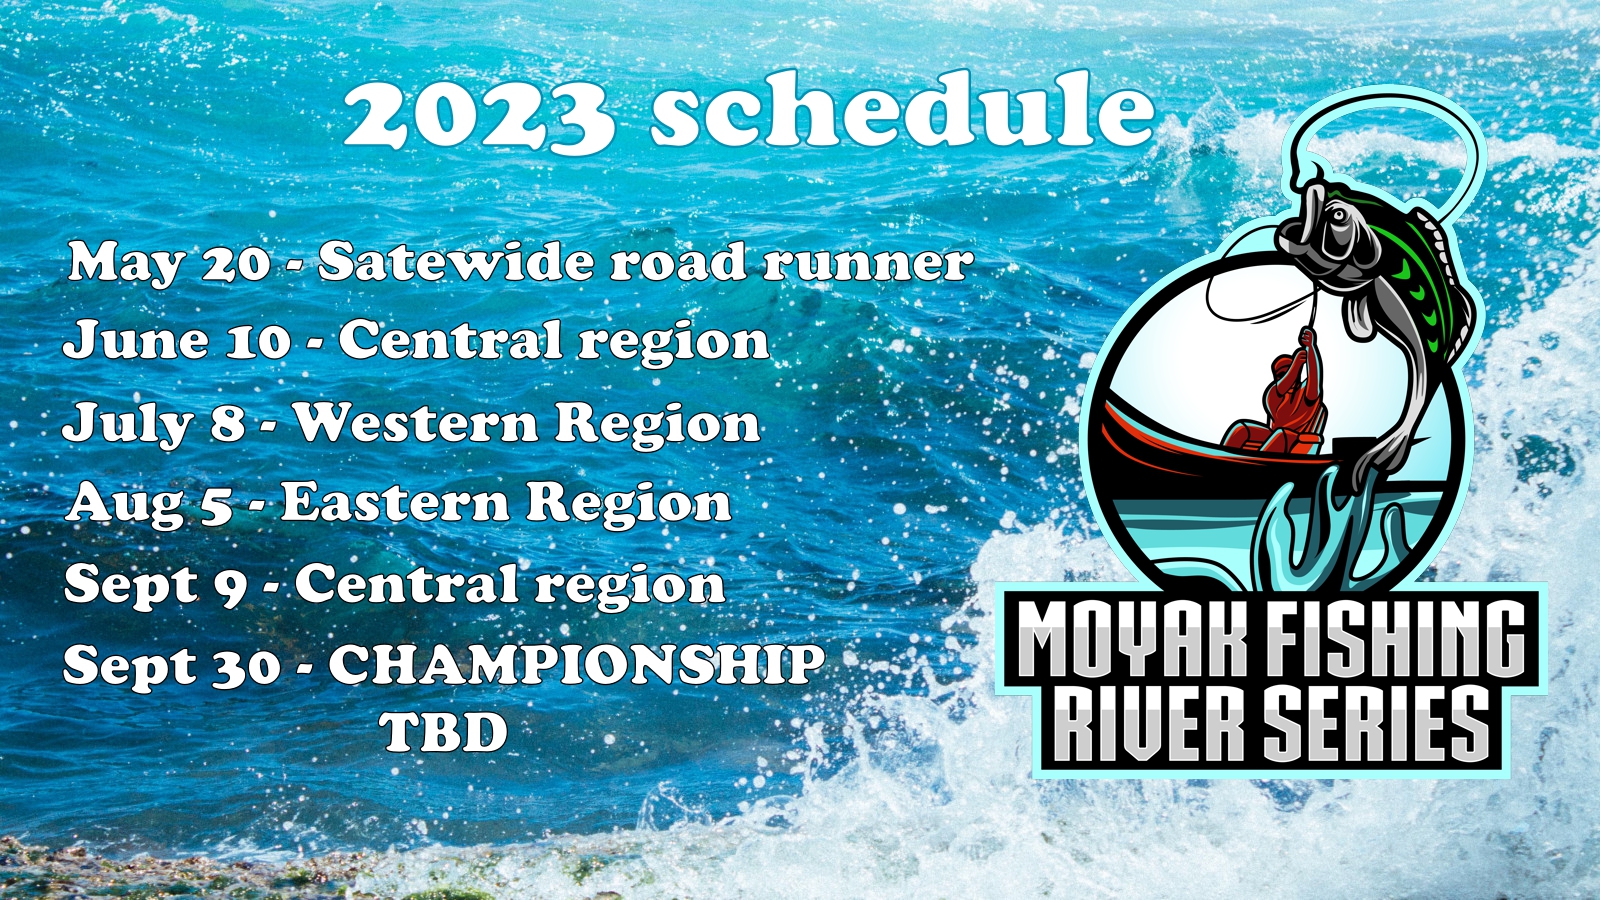 The 2023 schedule for MFTS